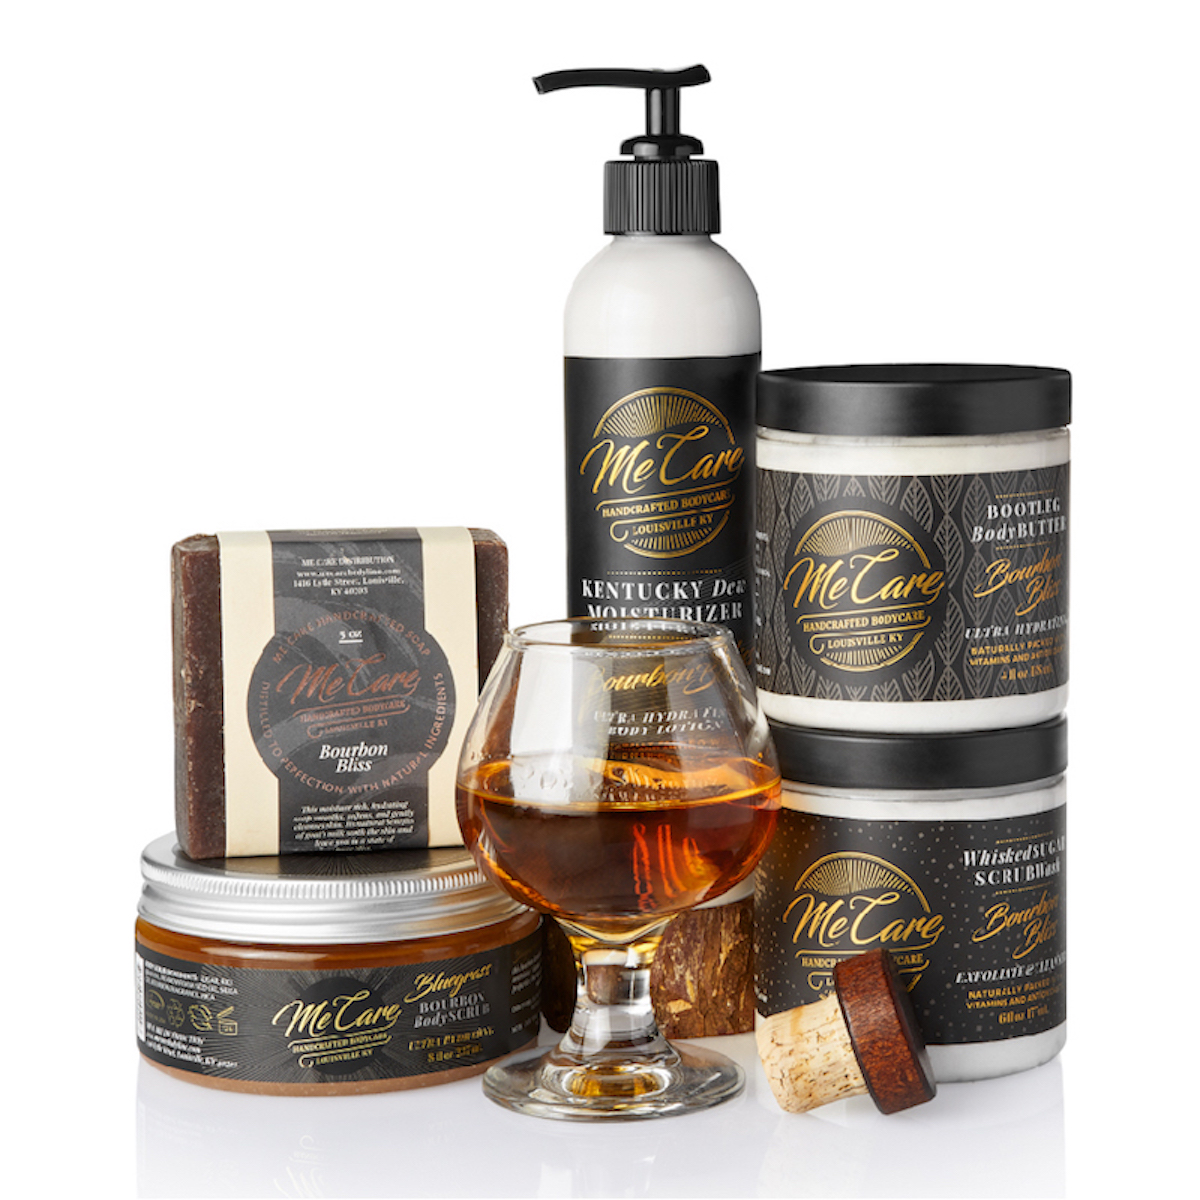 Bourbon-infused bodycare products from Me Care